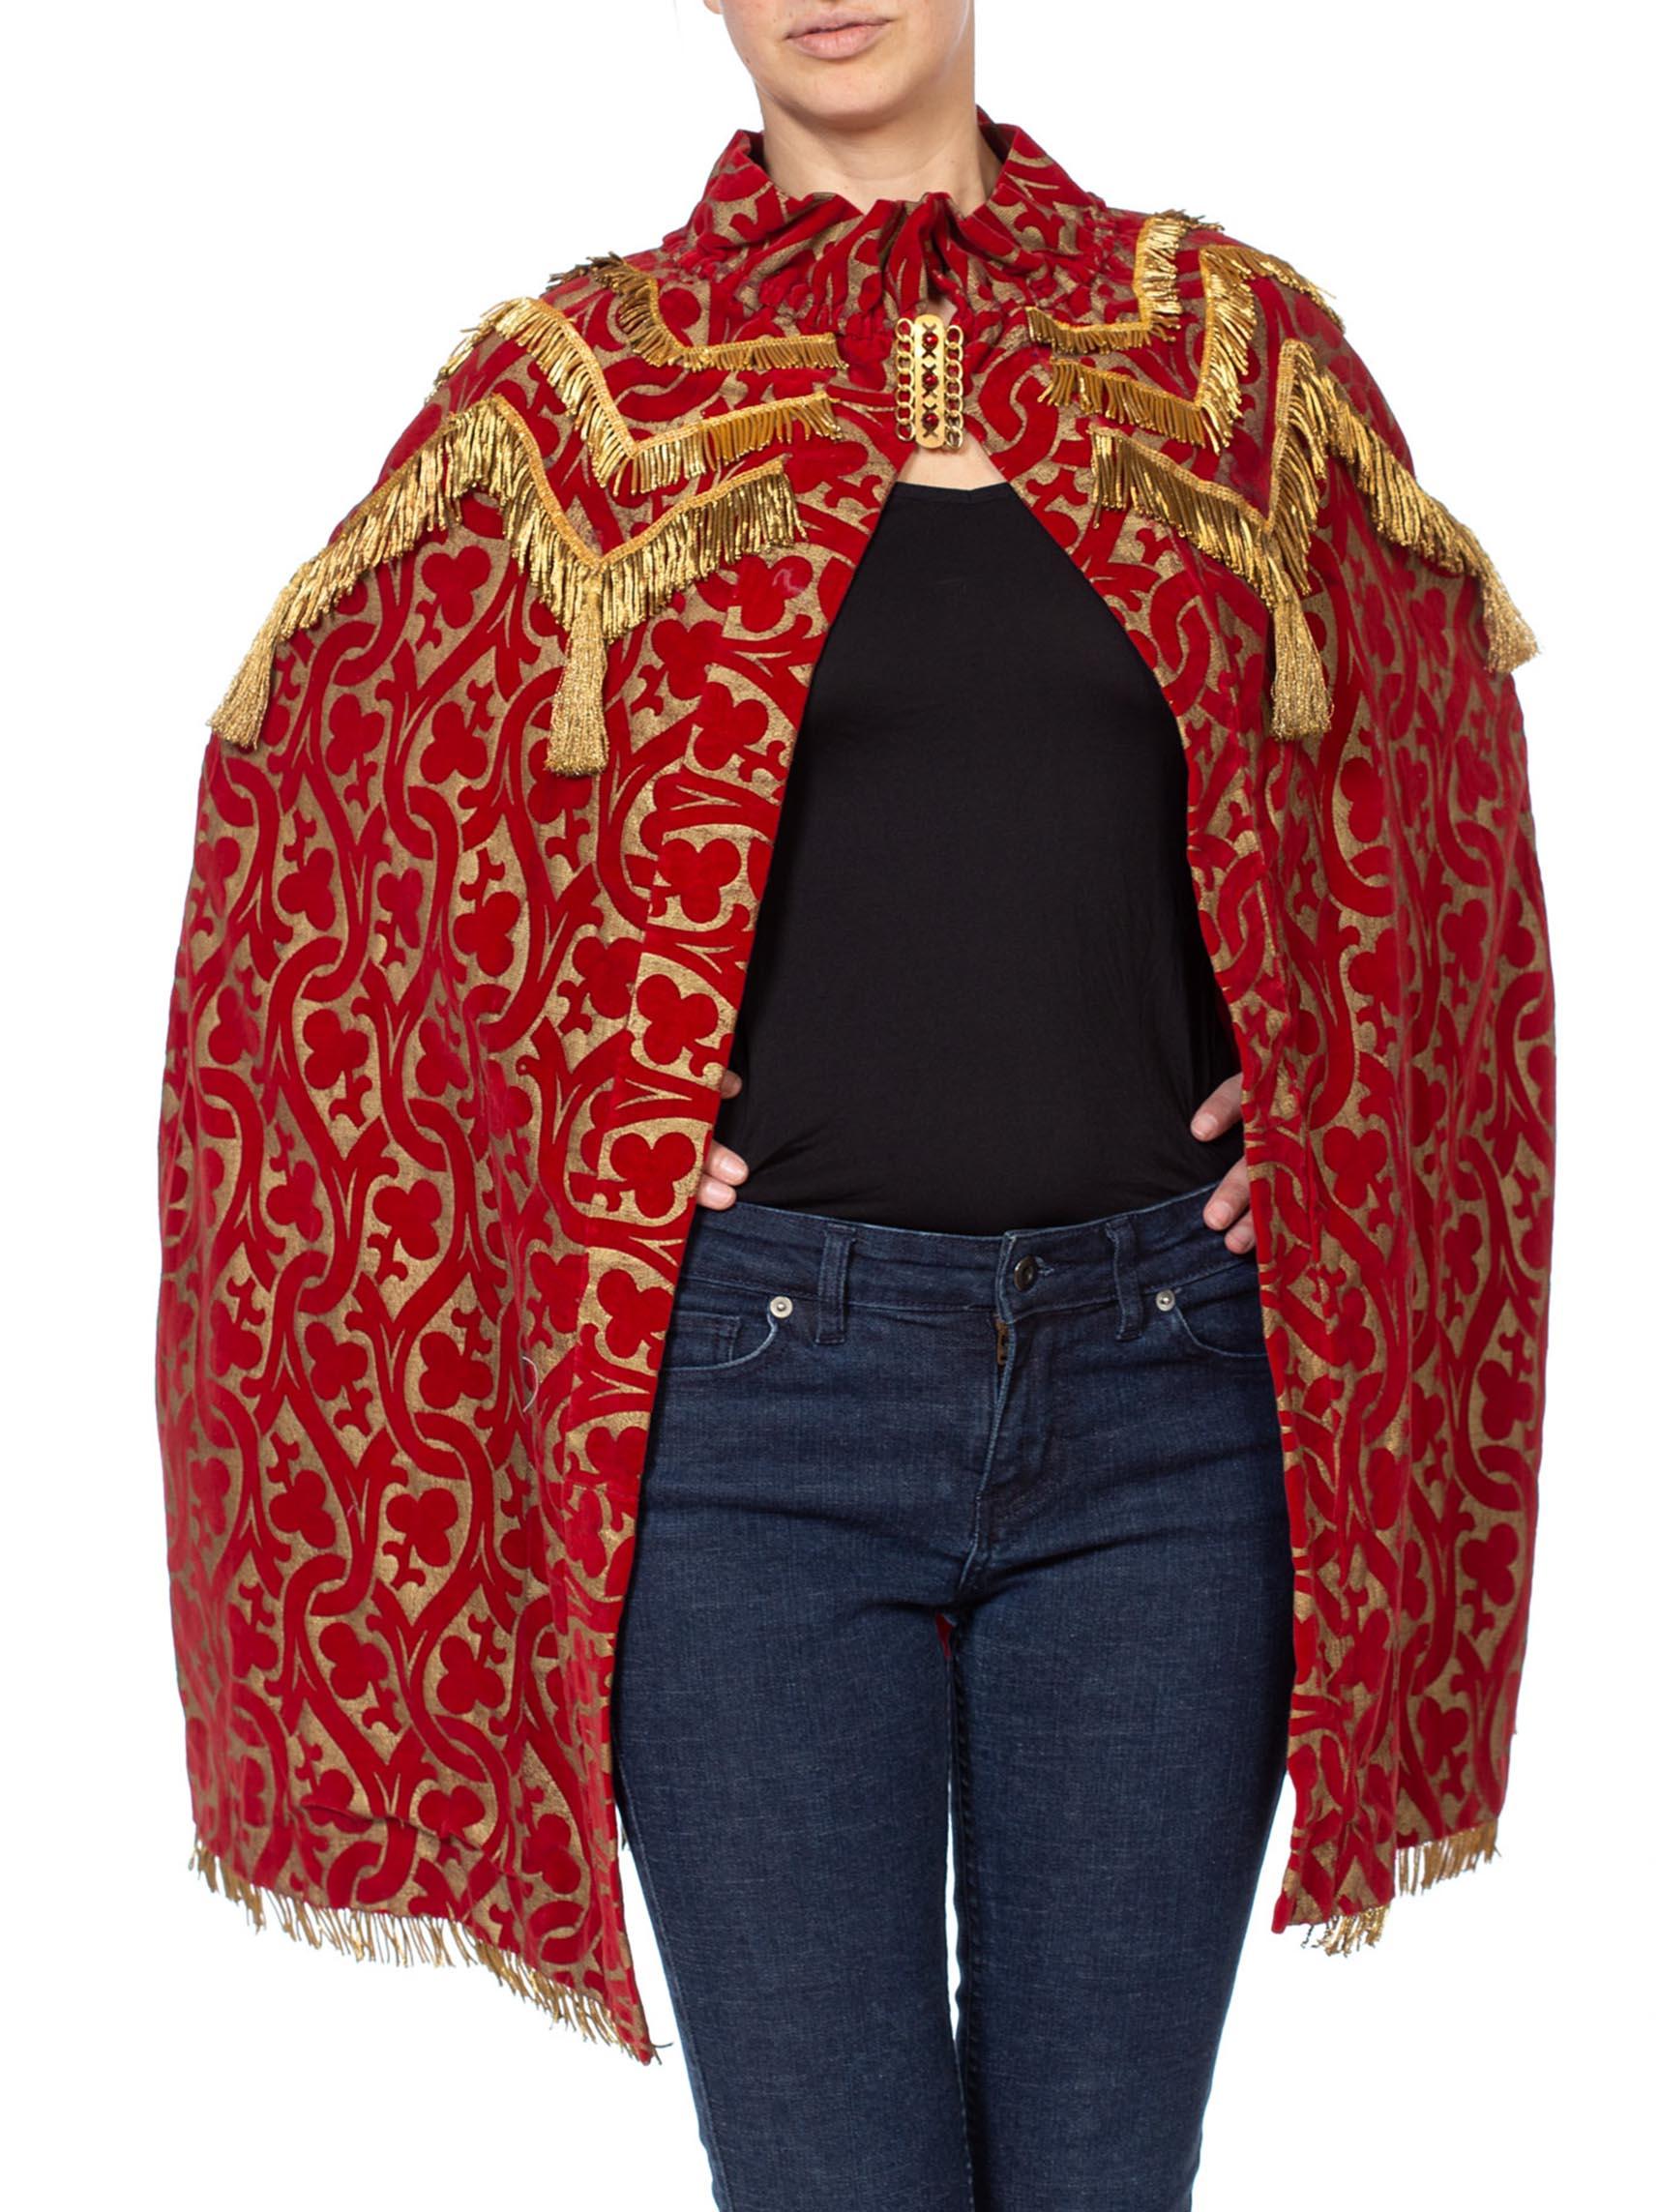 MORPHEW COLLECTION Red Metallic Printed Velvet Silk Lined Cape With Real Gold B In Excellent Condition For Sale In New York, NY